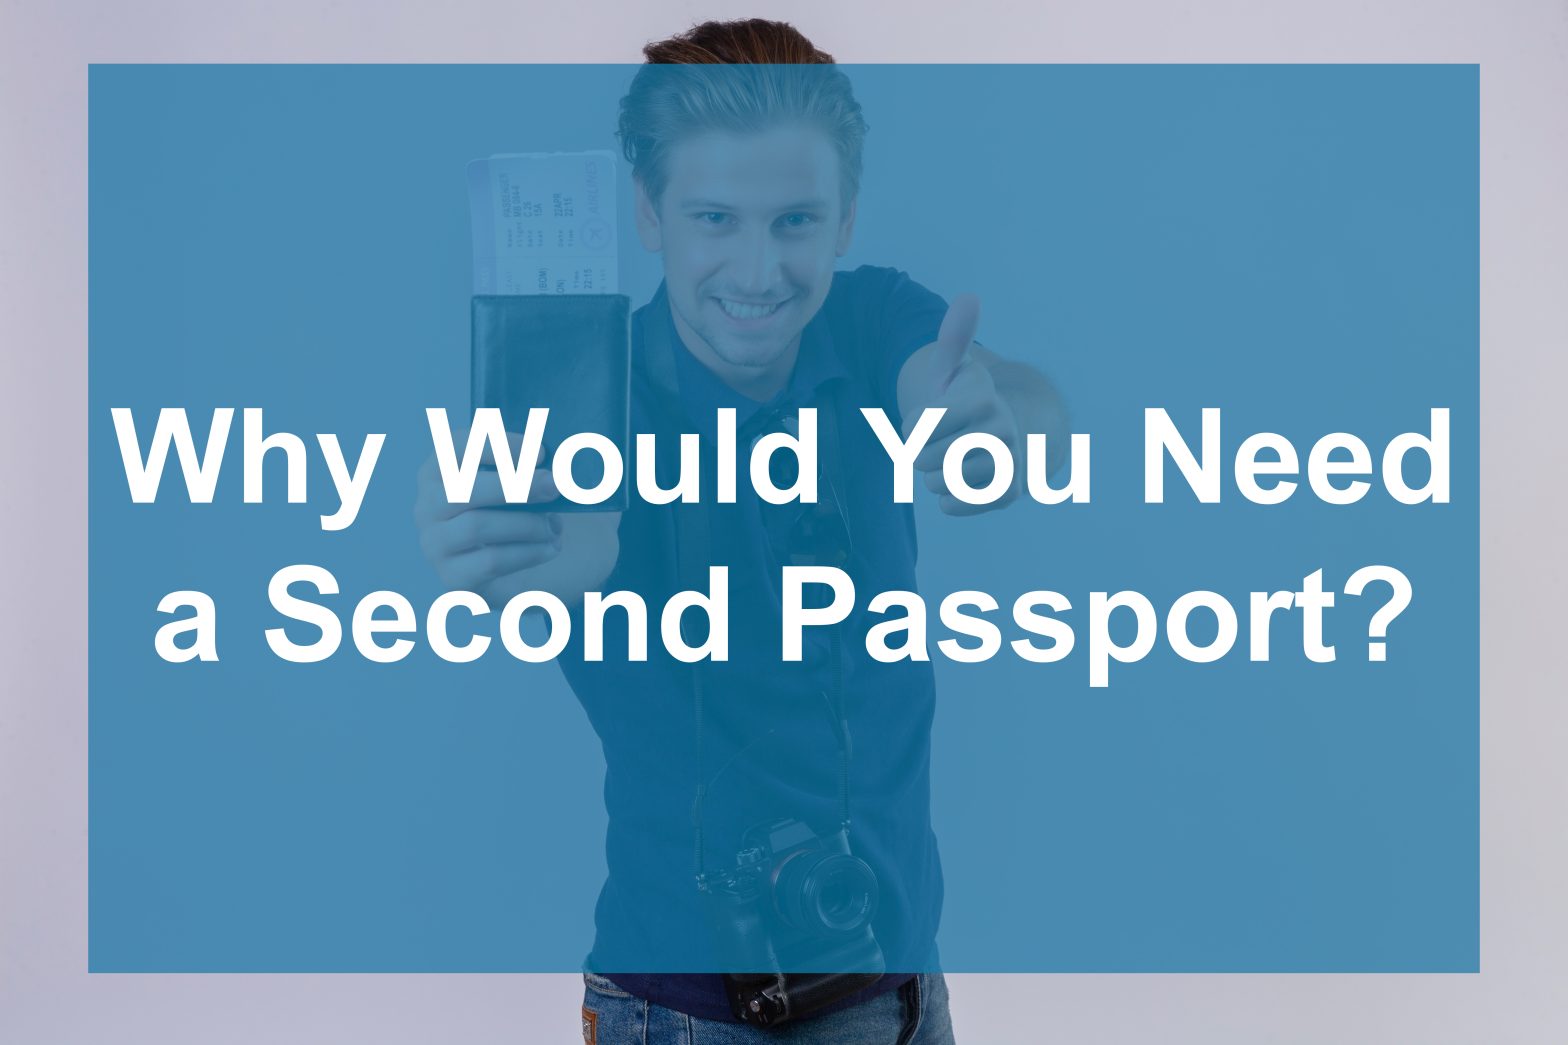 Best Second Passport Expert in Lahore Reveals Why Anyone Would Need a Second Passport